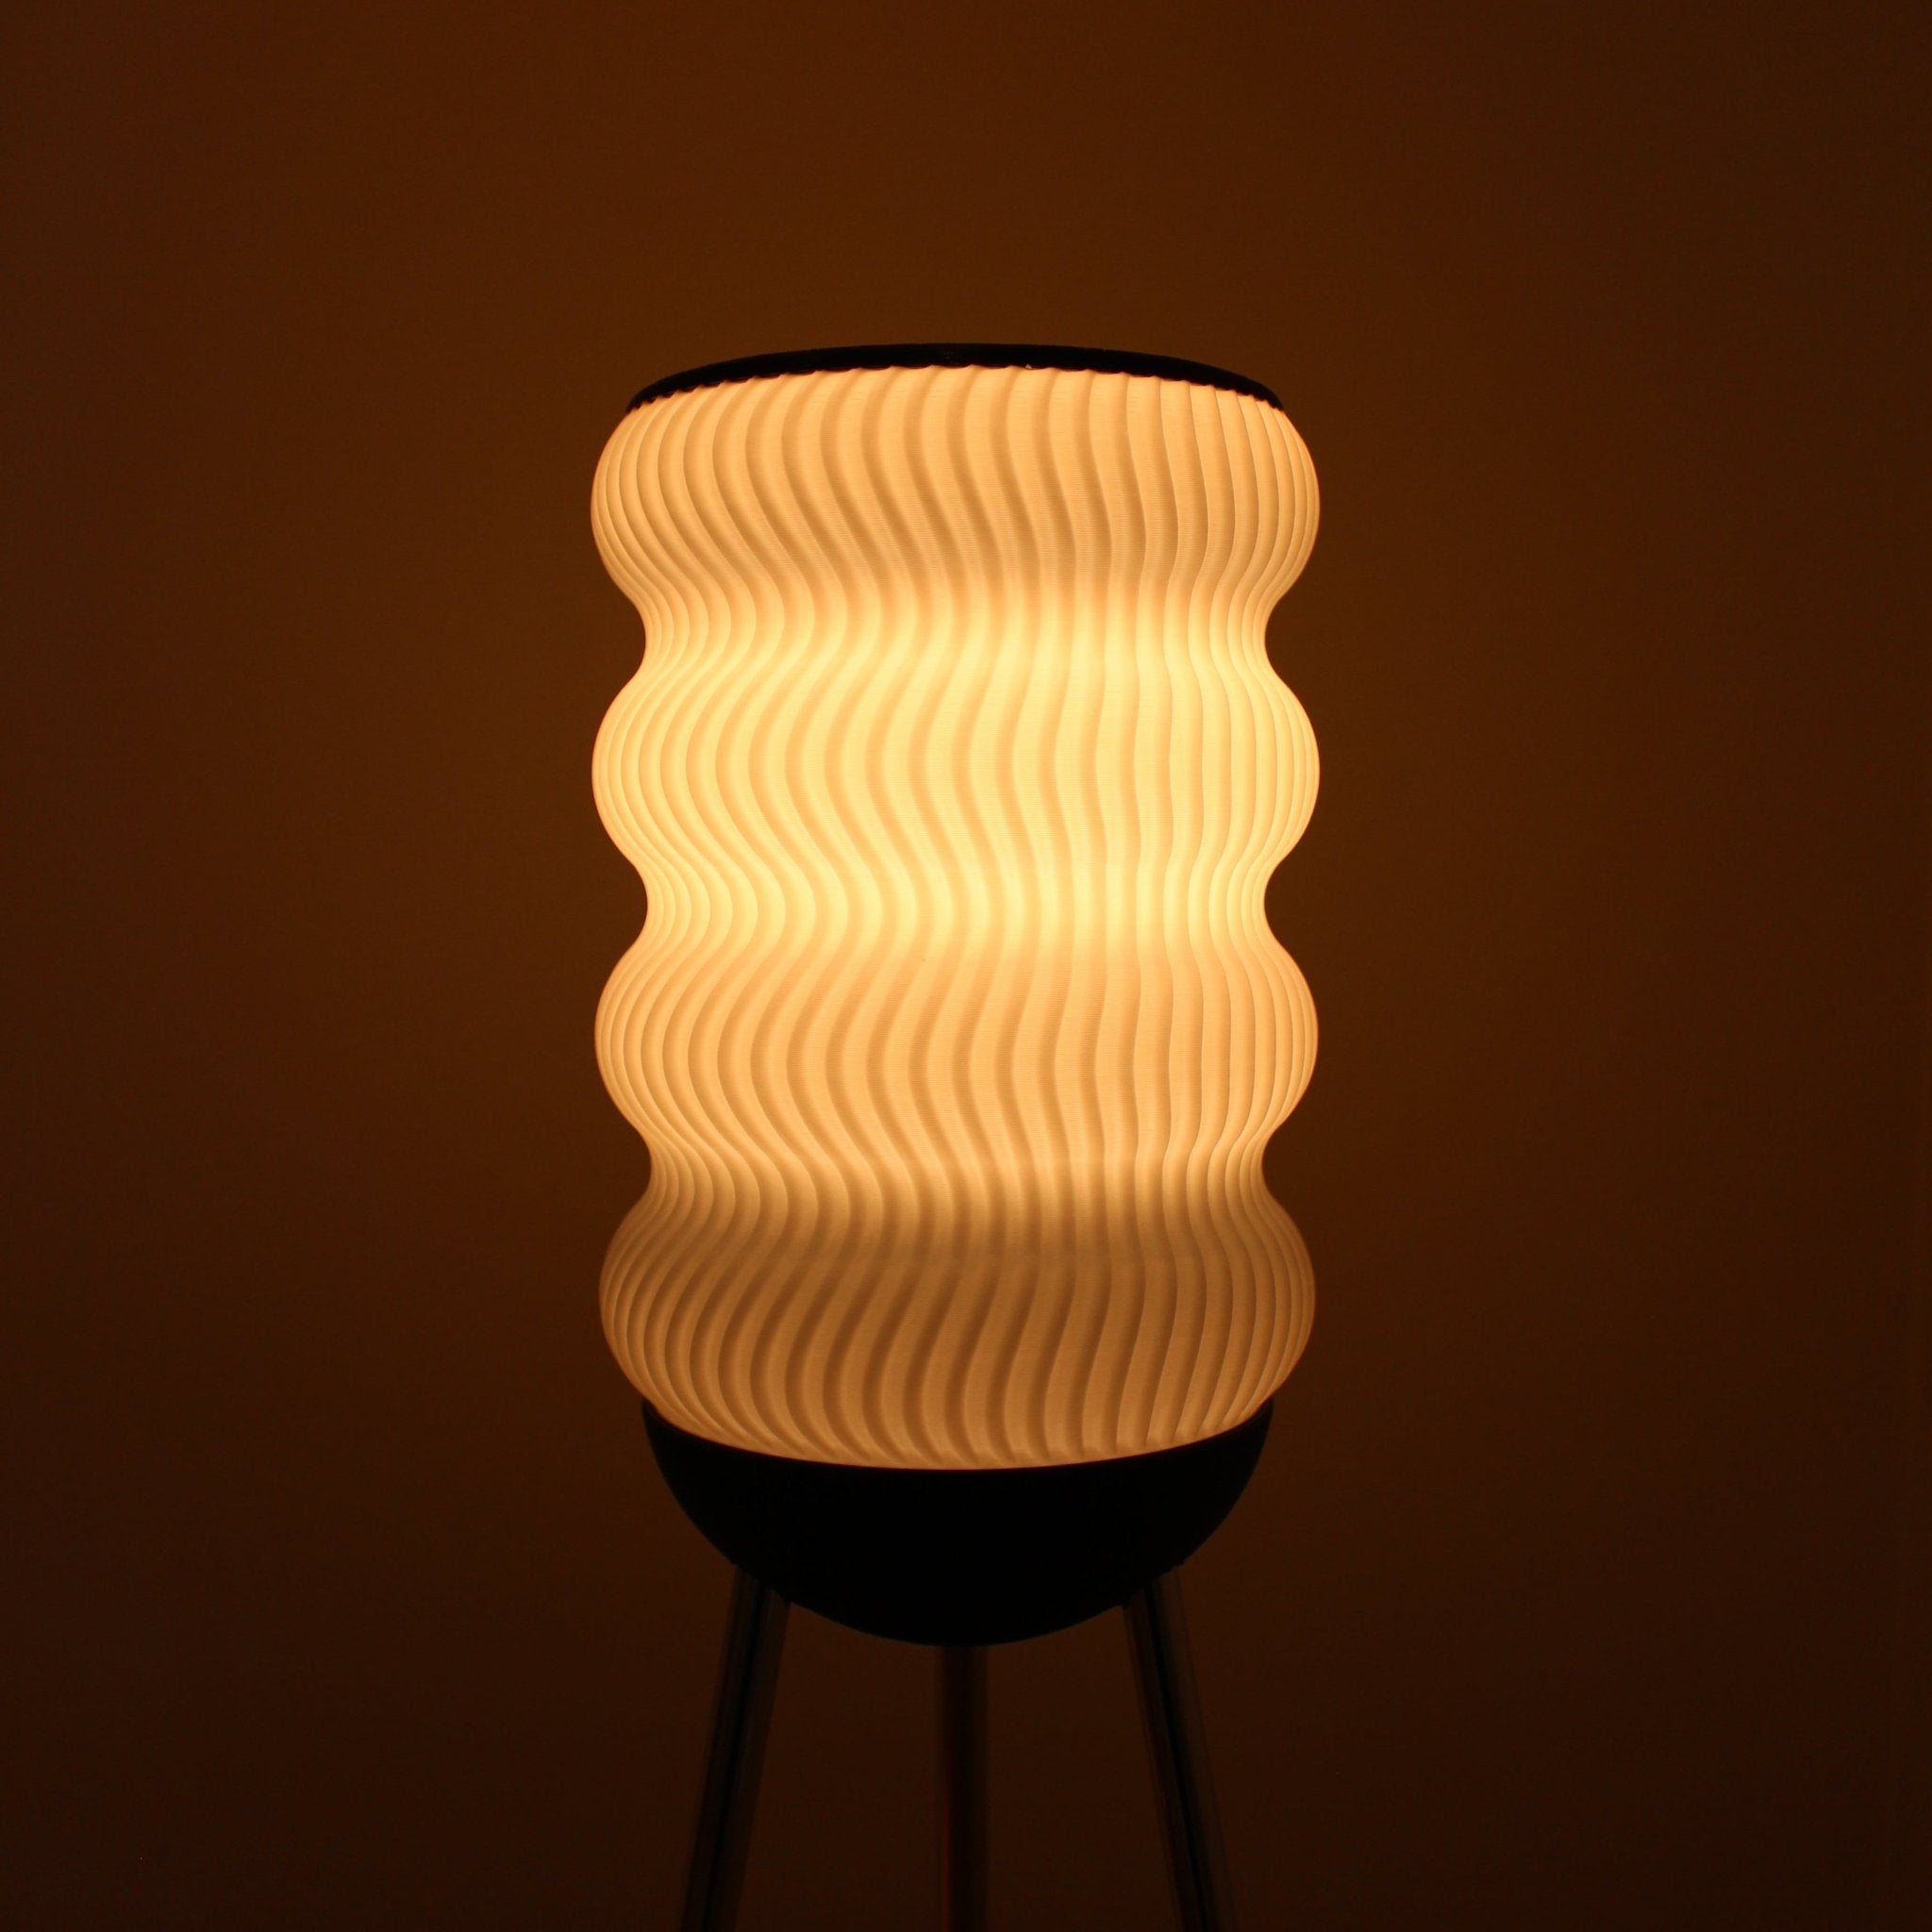 Kyma floor lamp made with recycled plastic by Deme Design, pictured on dim setting